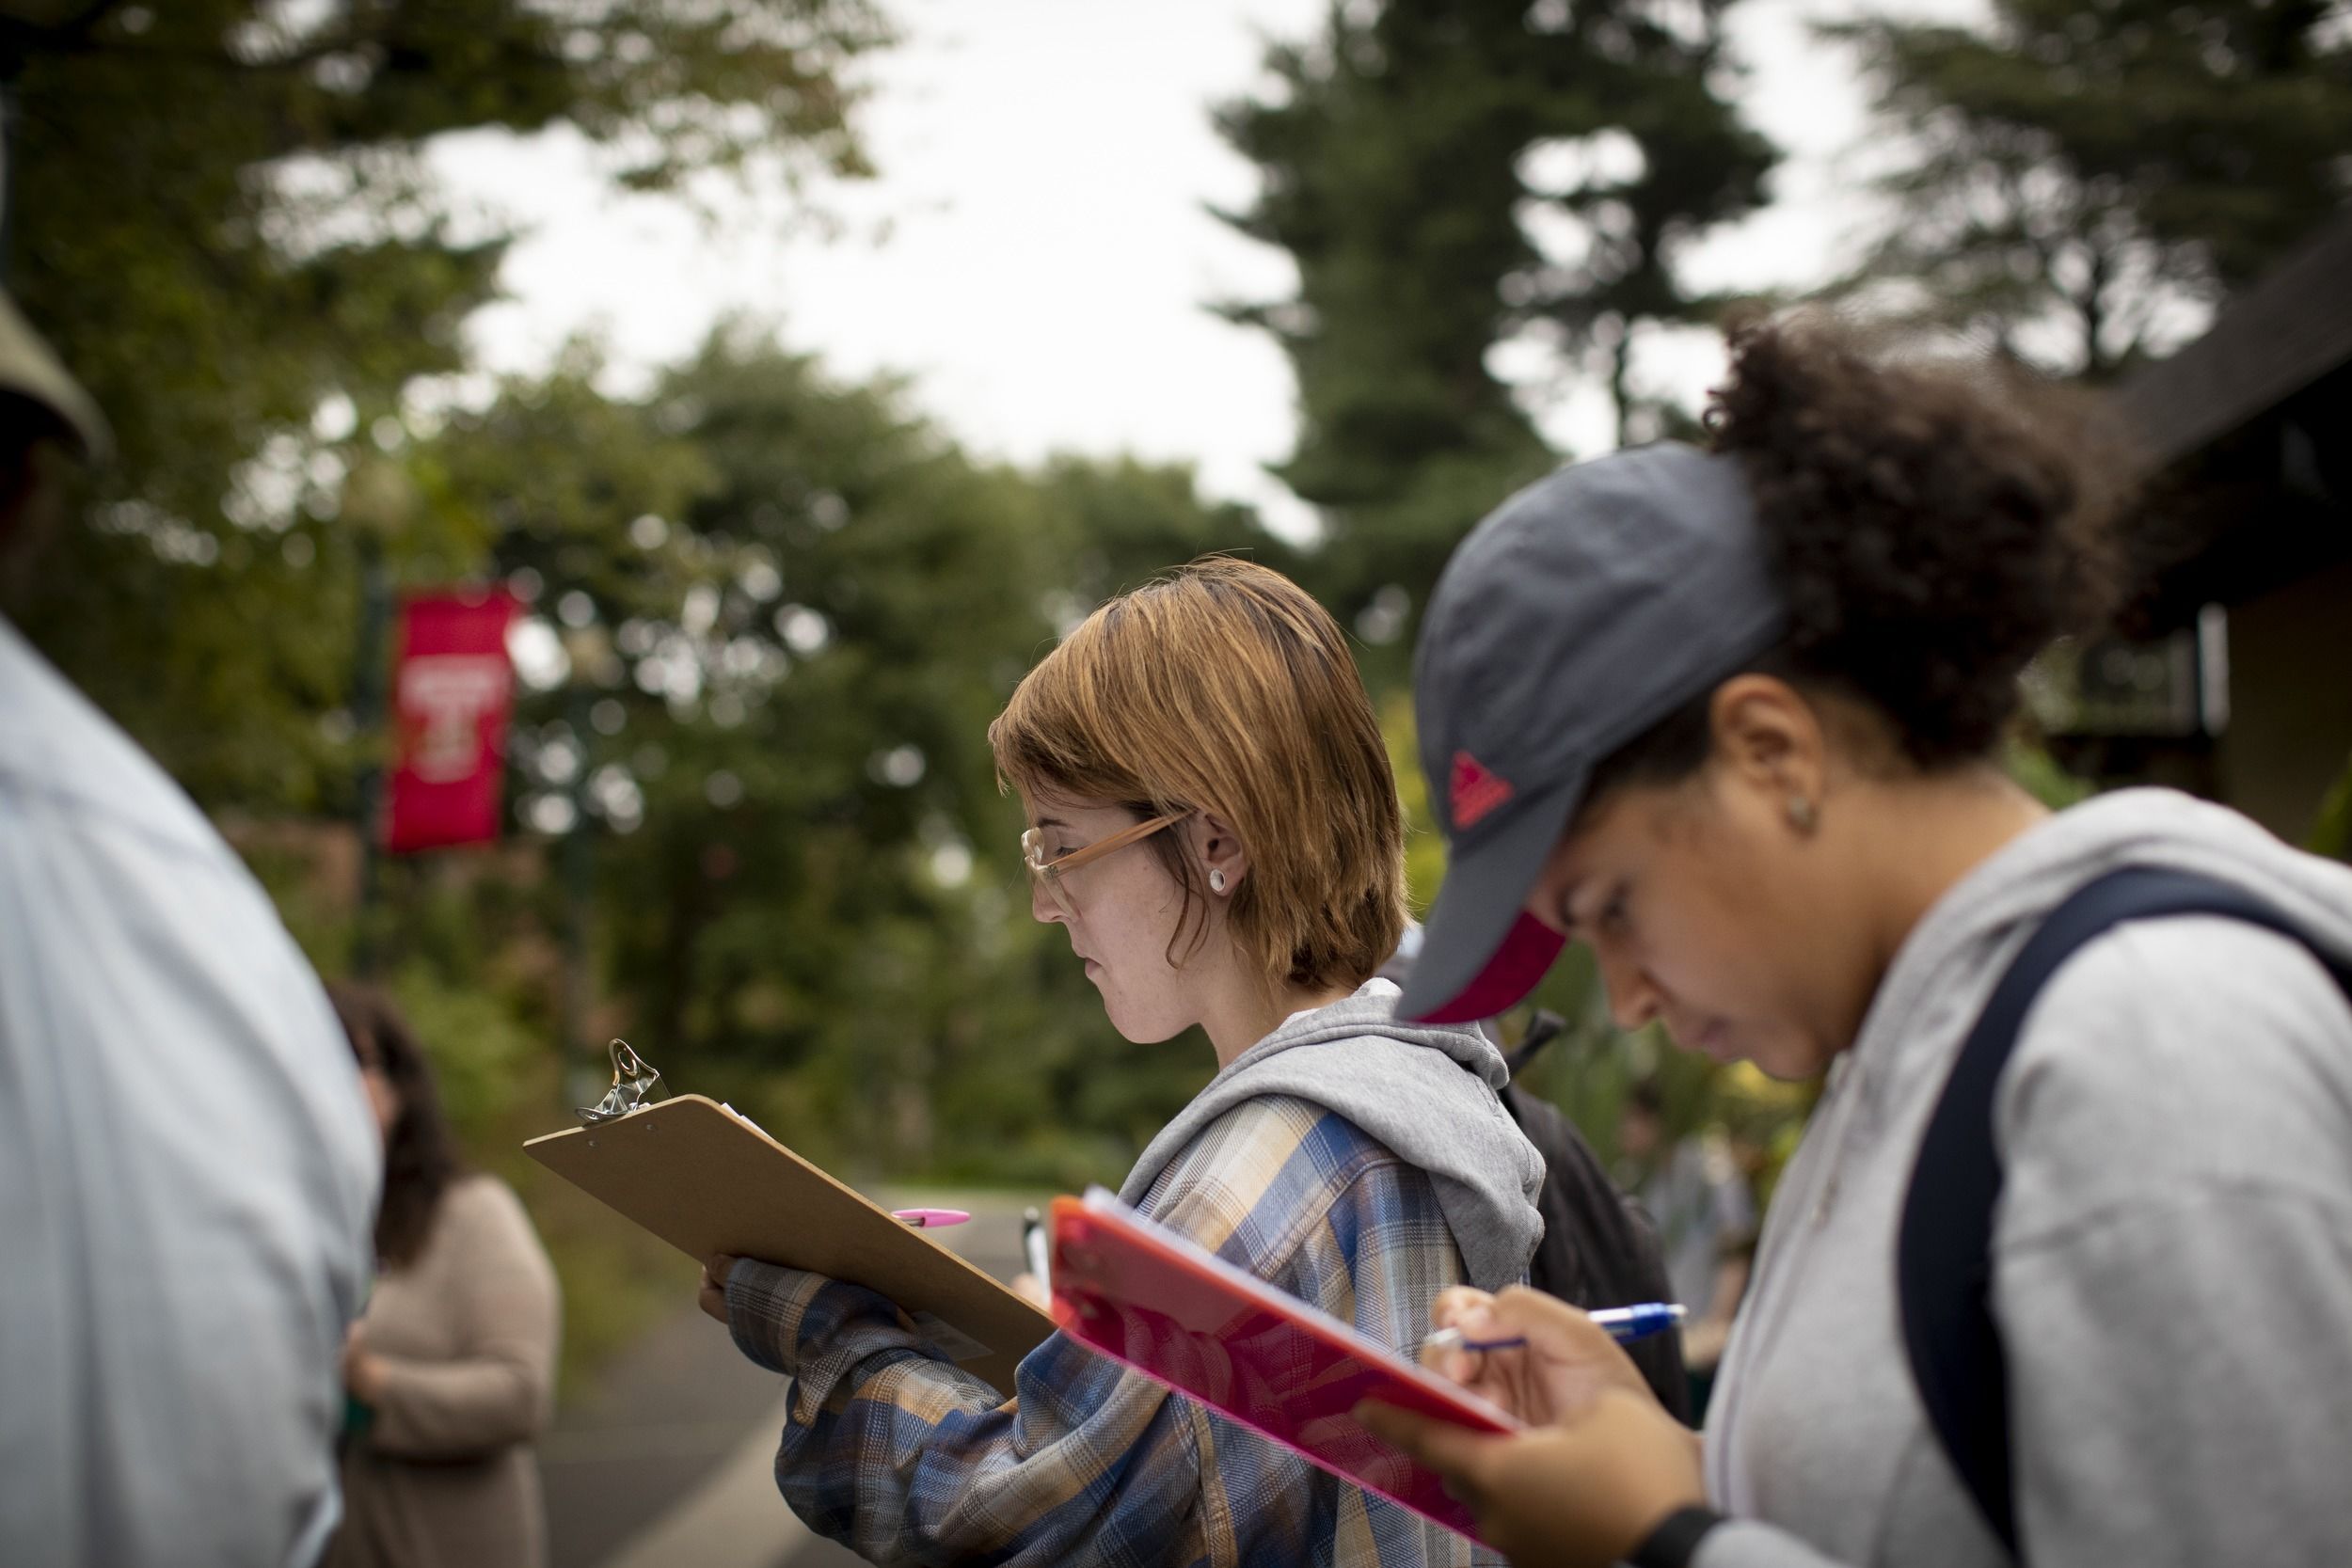 Students take notes on clipboards while standing outside at Ambler Campus.